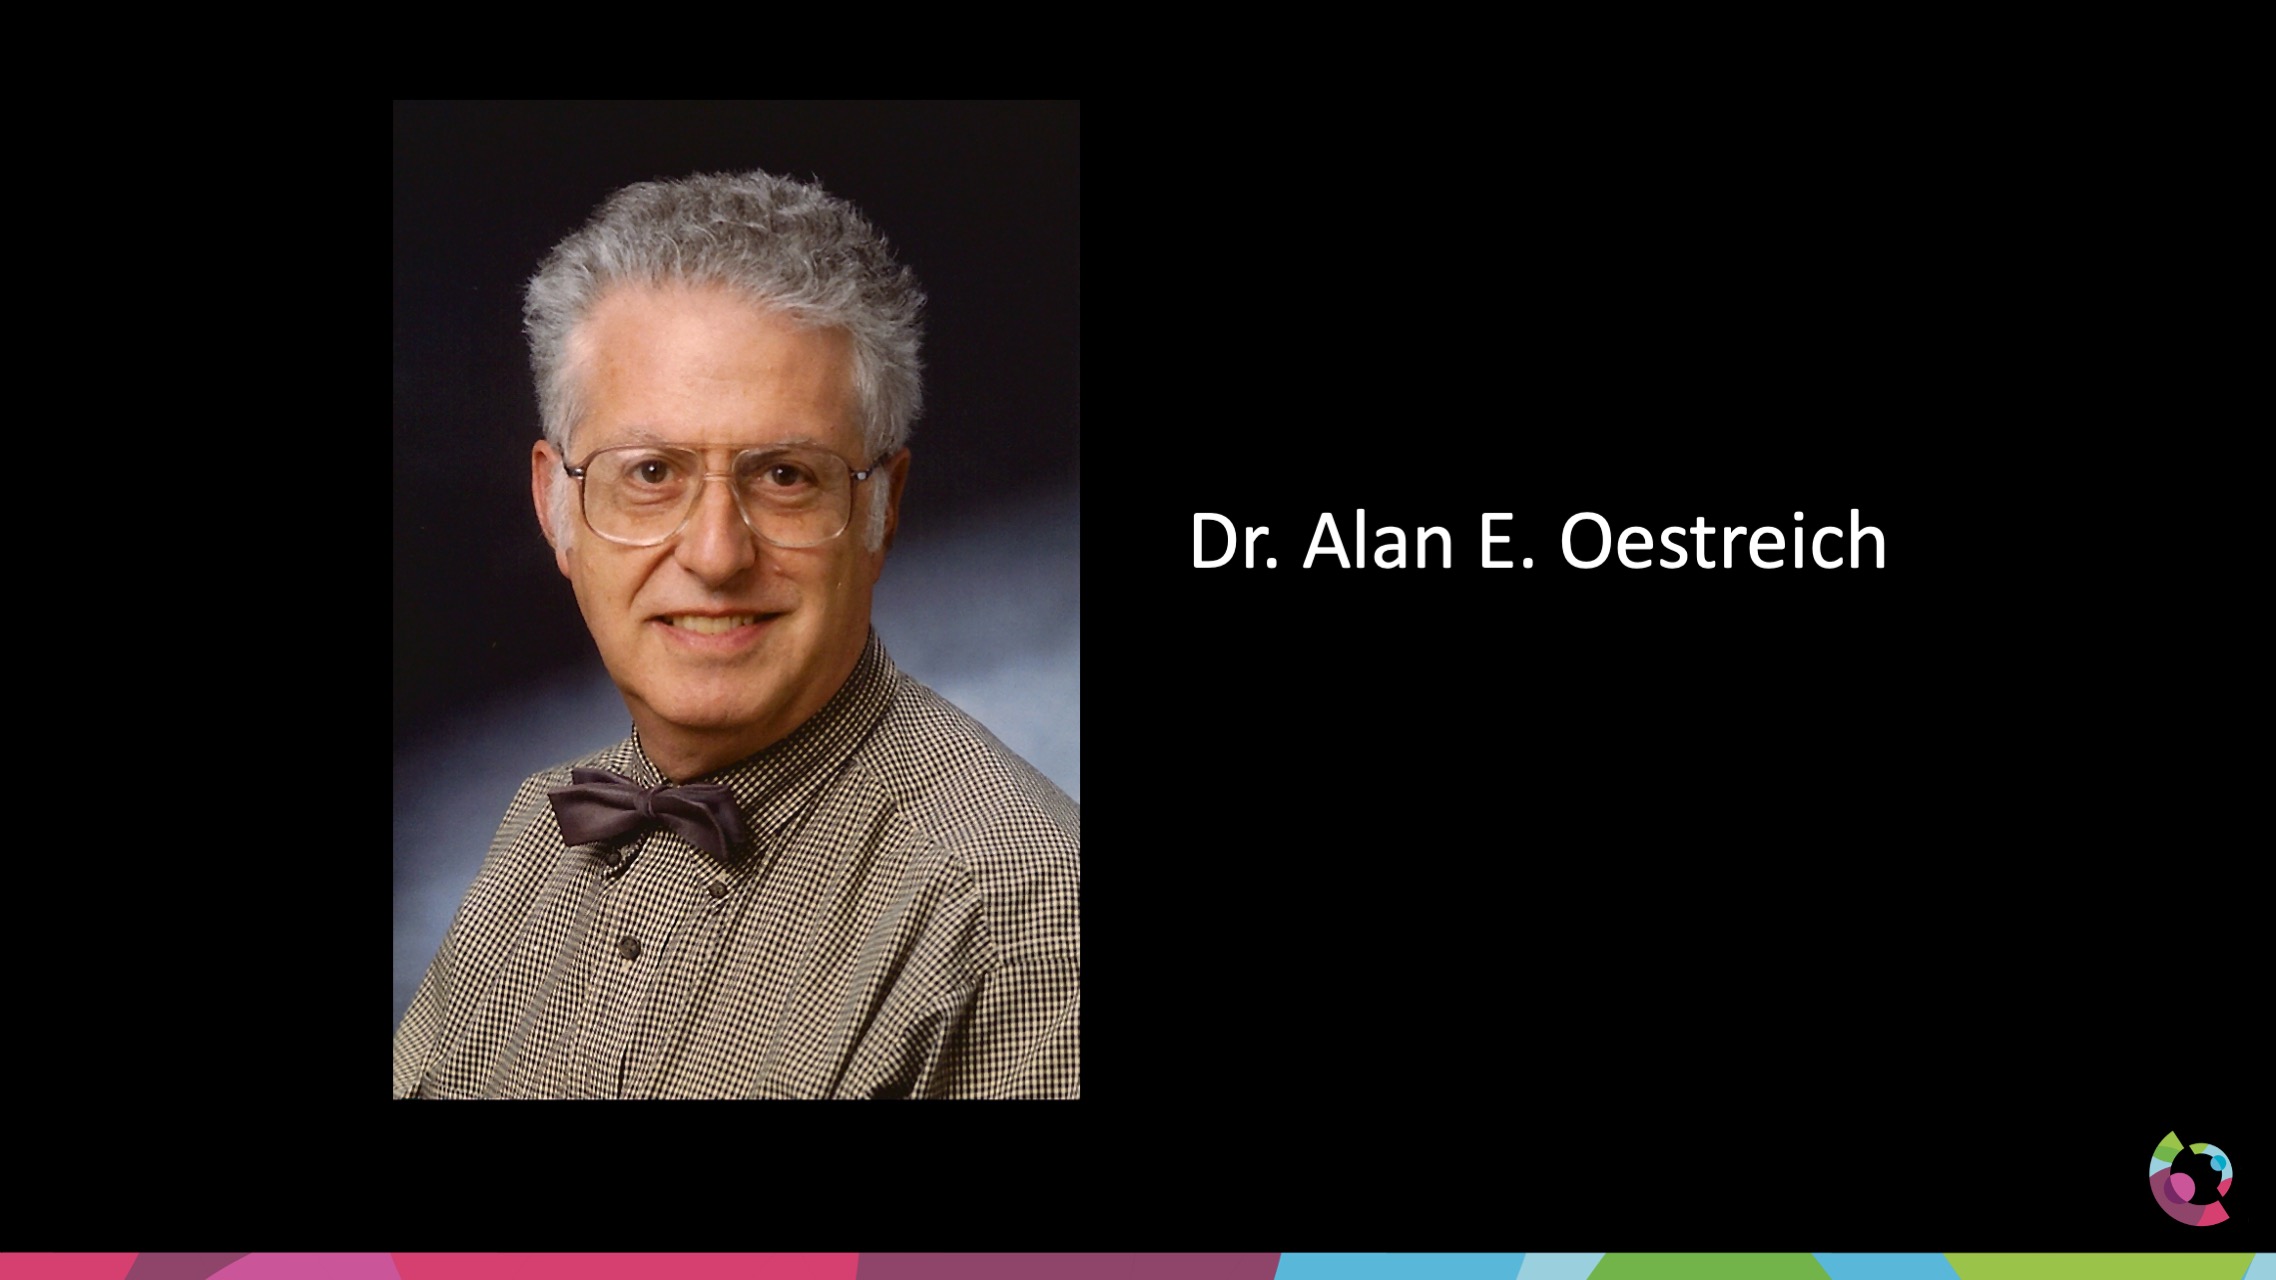 Cincinnati Children’s Radiology Honors Dr. Alan Oestreich at Celebration of Life Event 